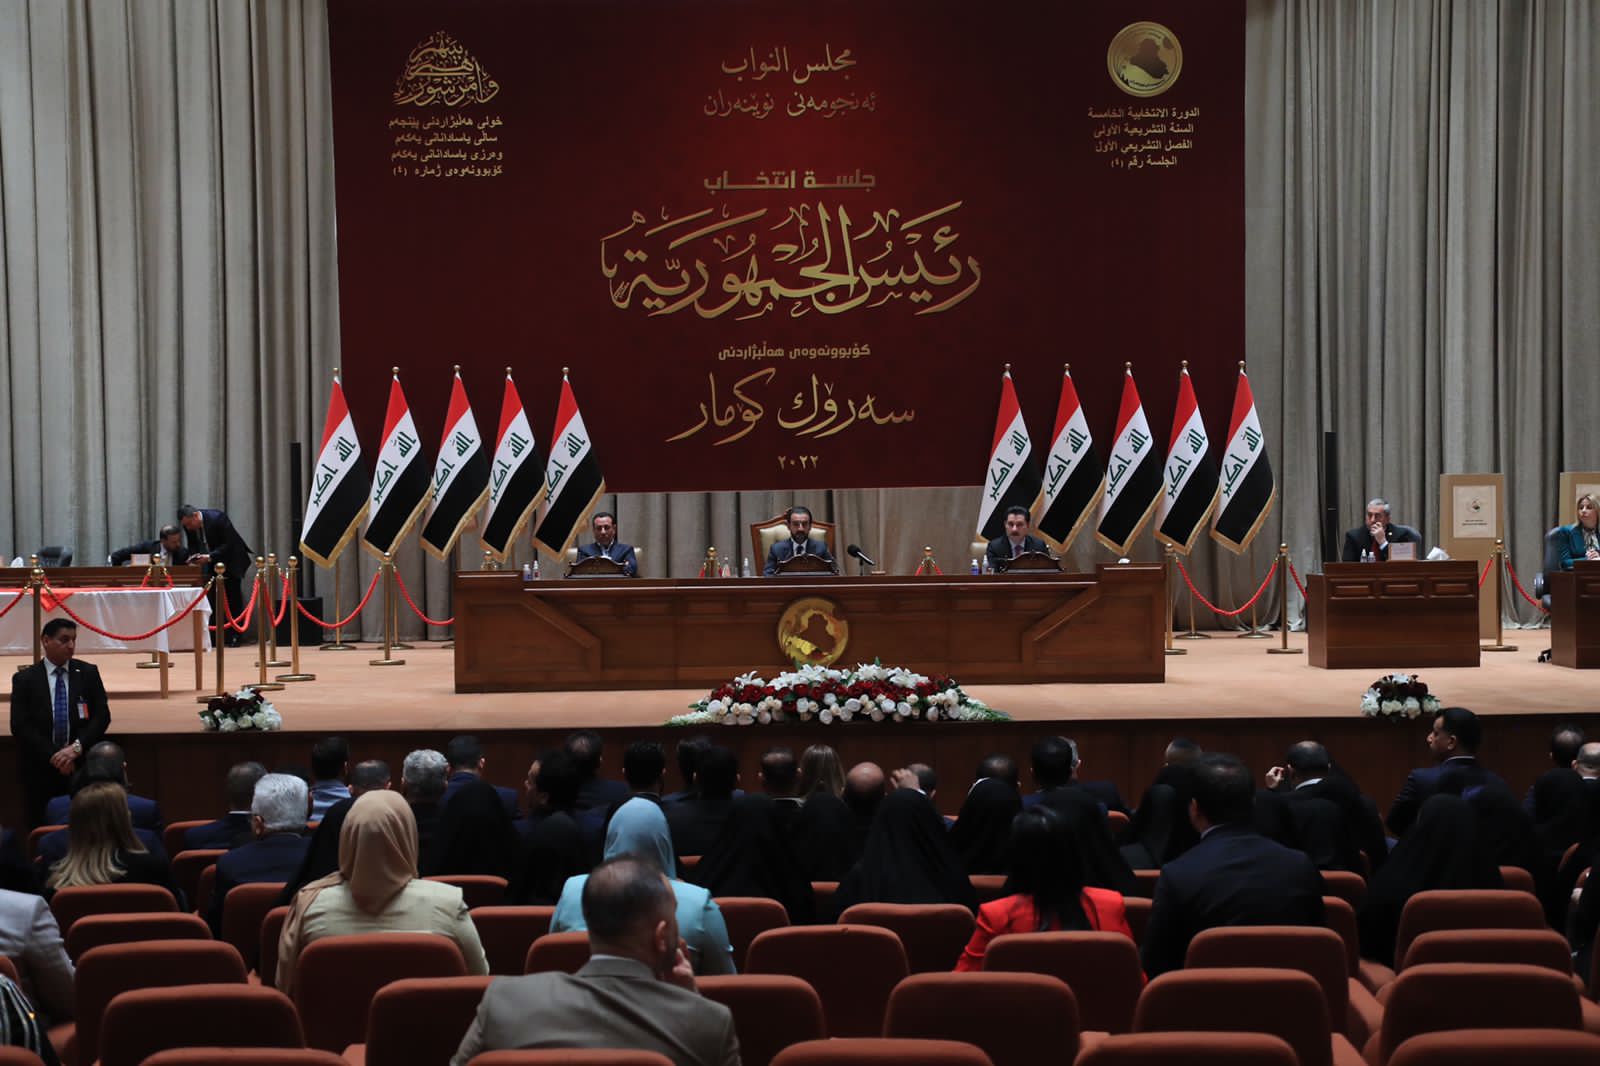 Political parties suspend the monitoring role of the Parliament for their benefit, State of Law